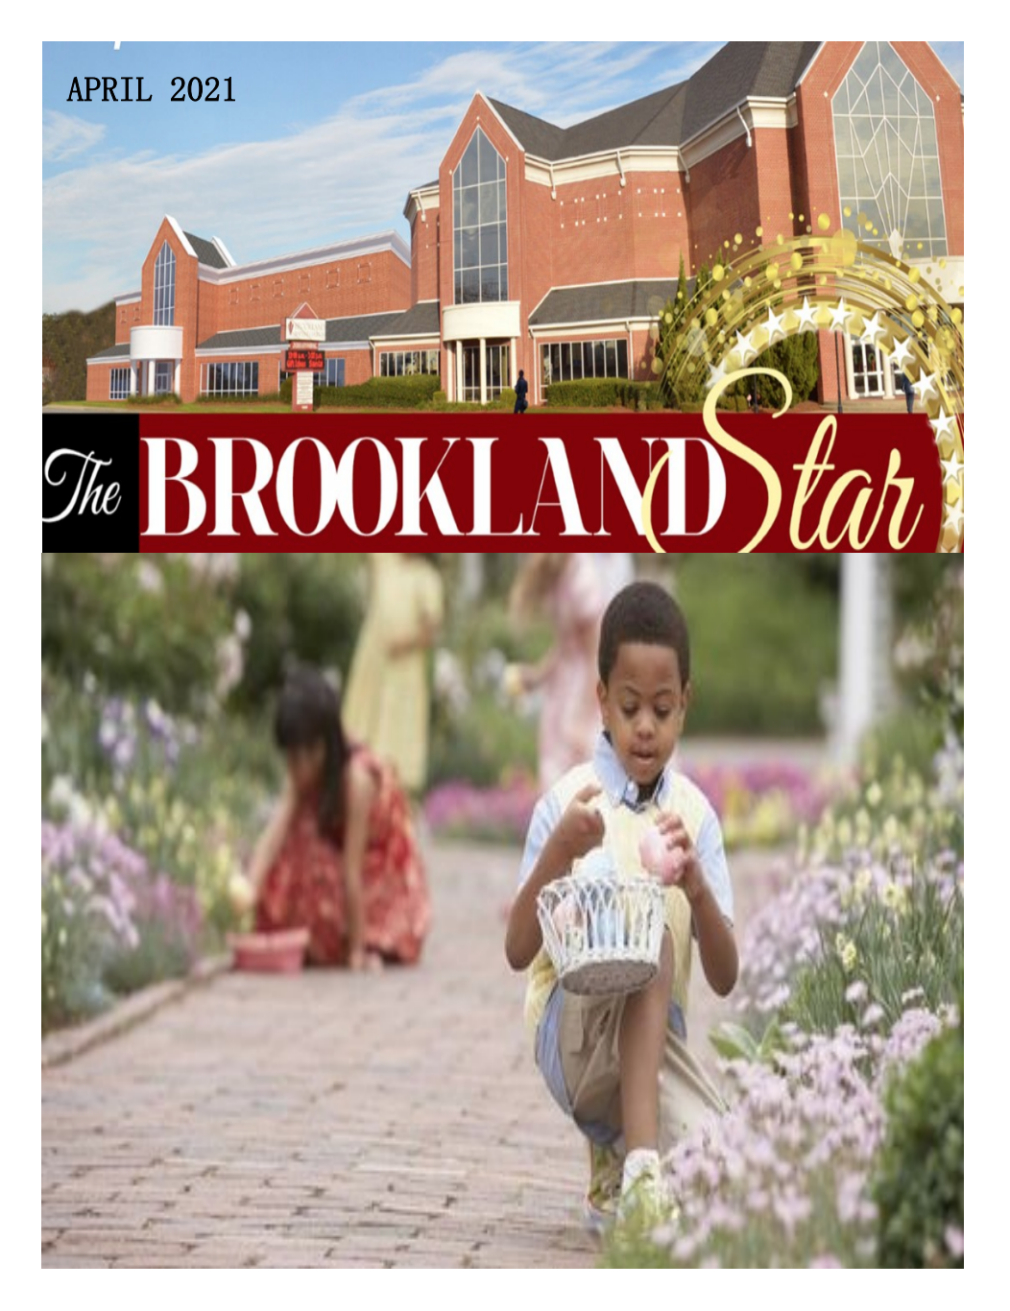 The Brookland Star April 2021 Edition